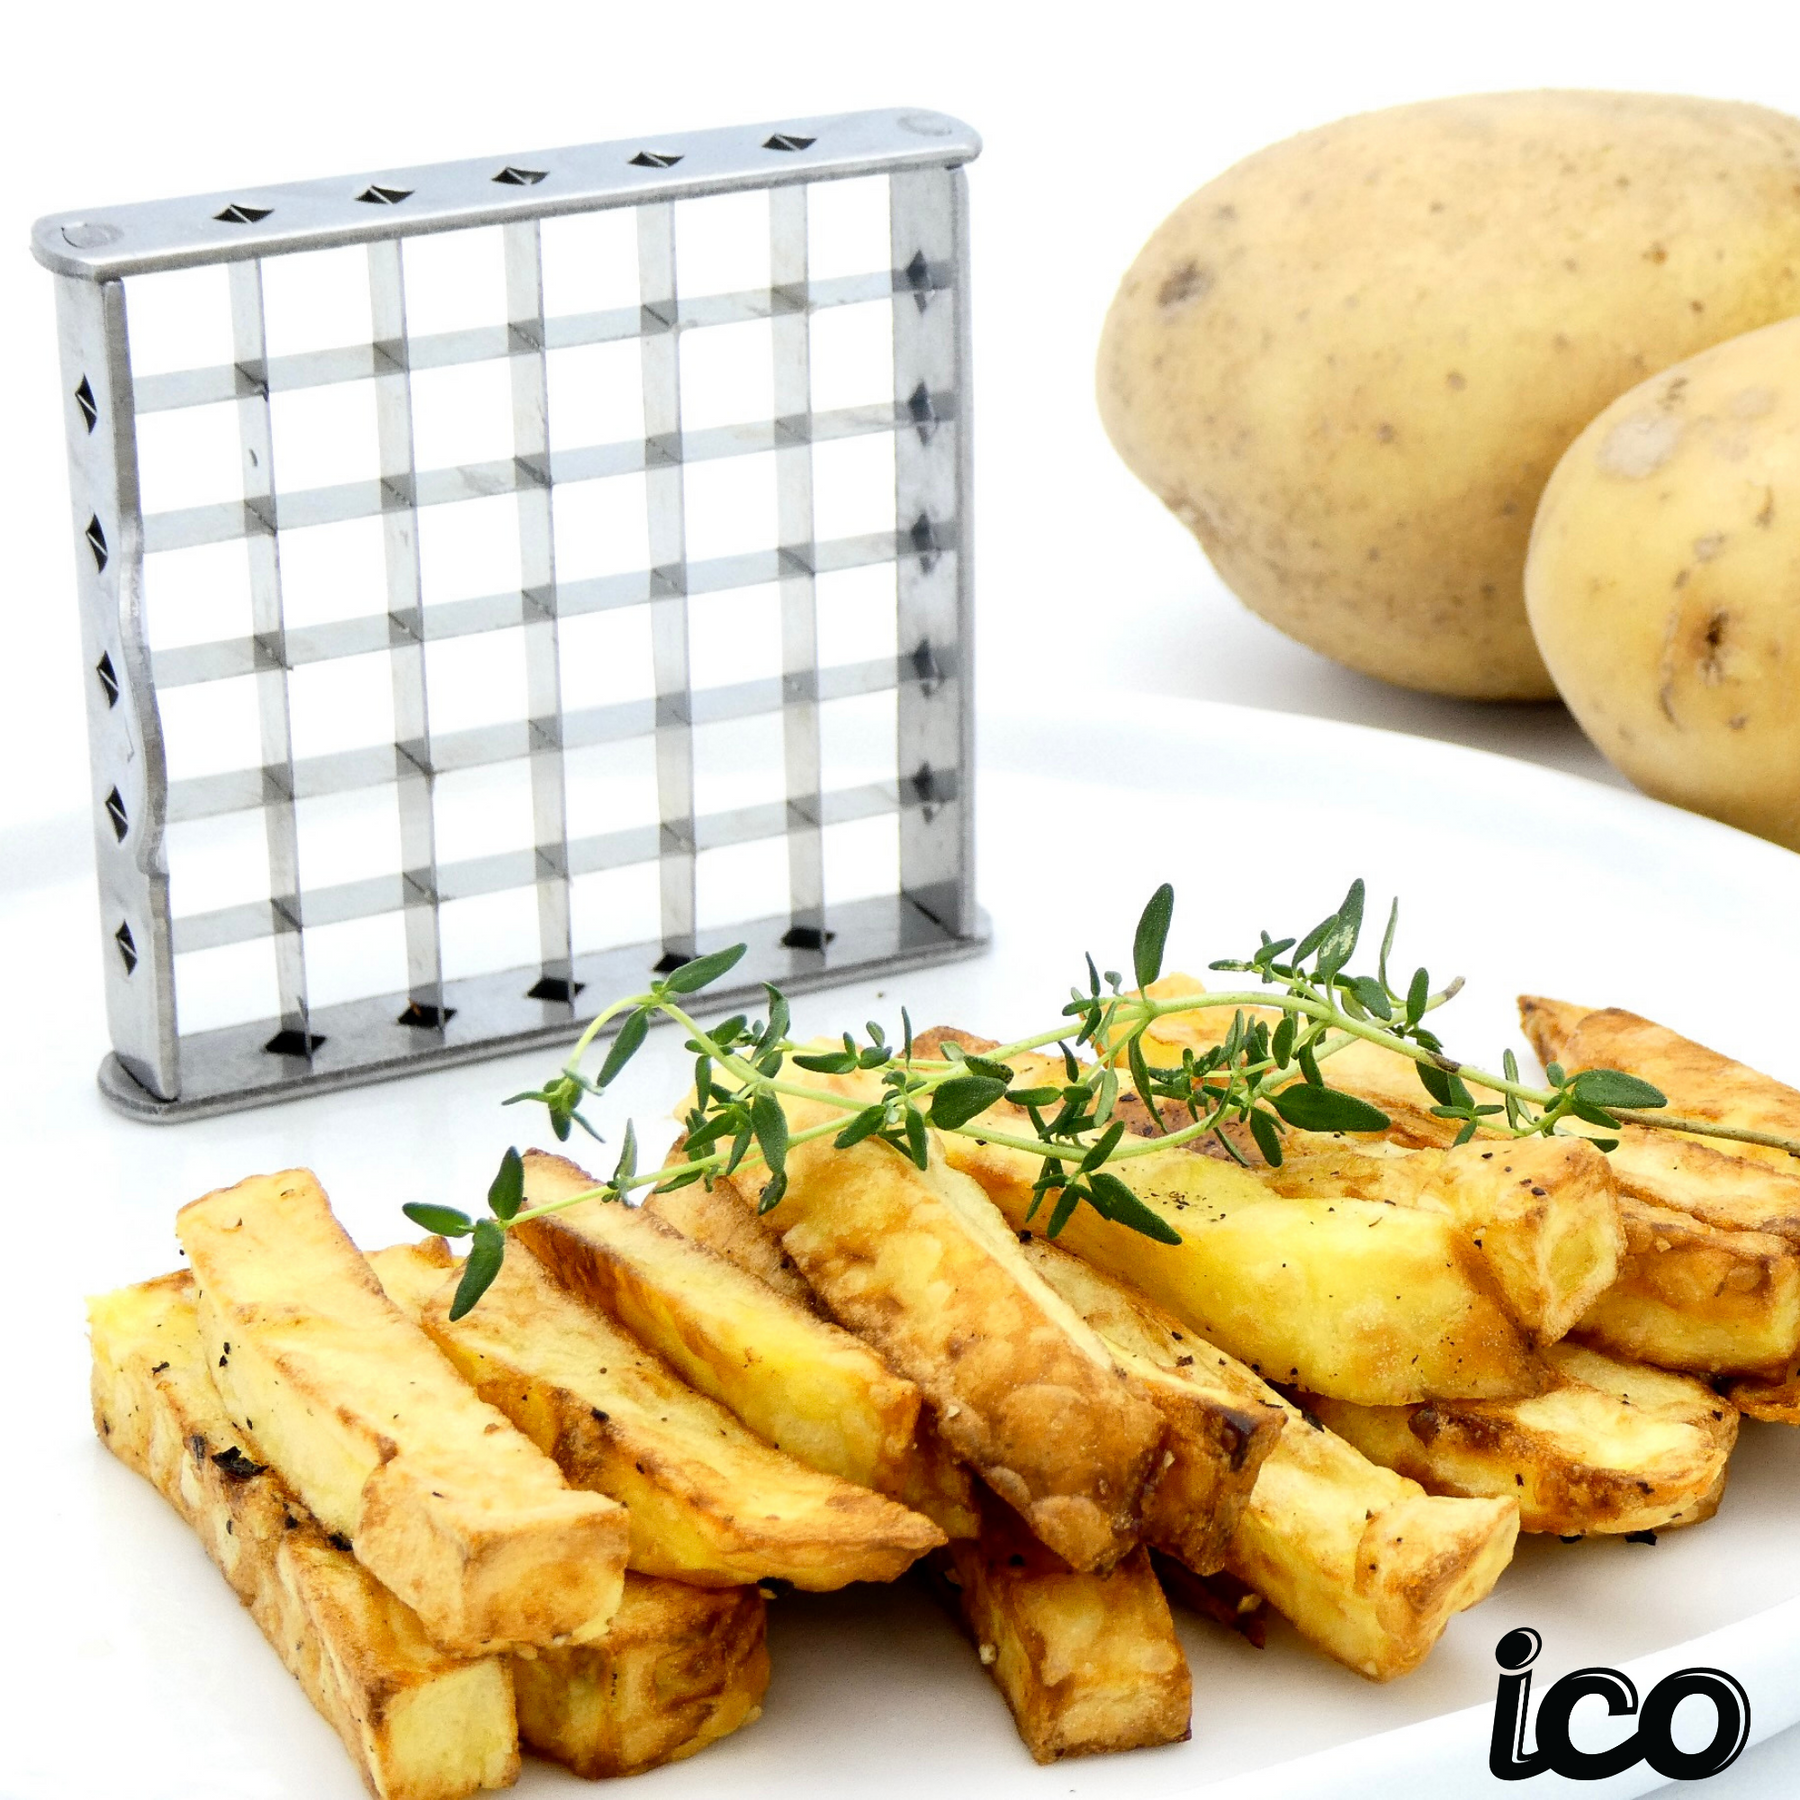 ICO Potato Cutter and Vegetable Dicer with Stainless Steel Blade